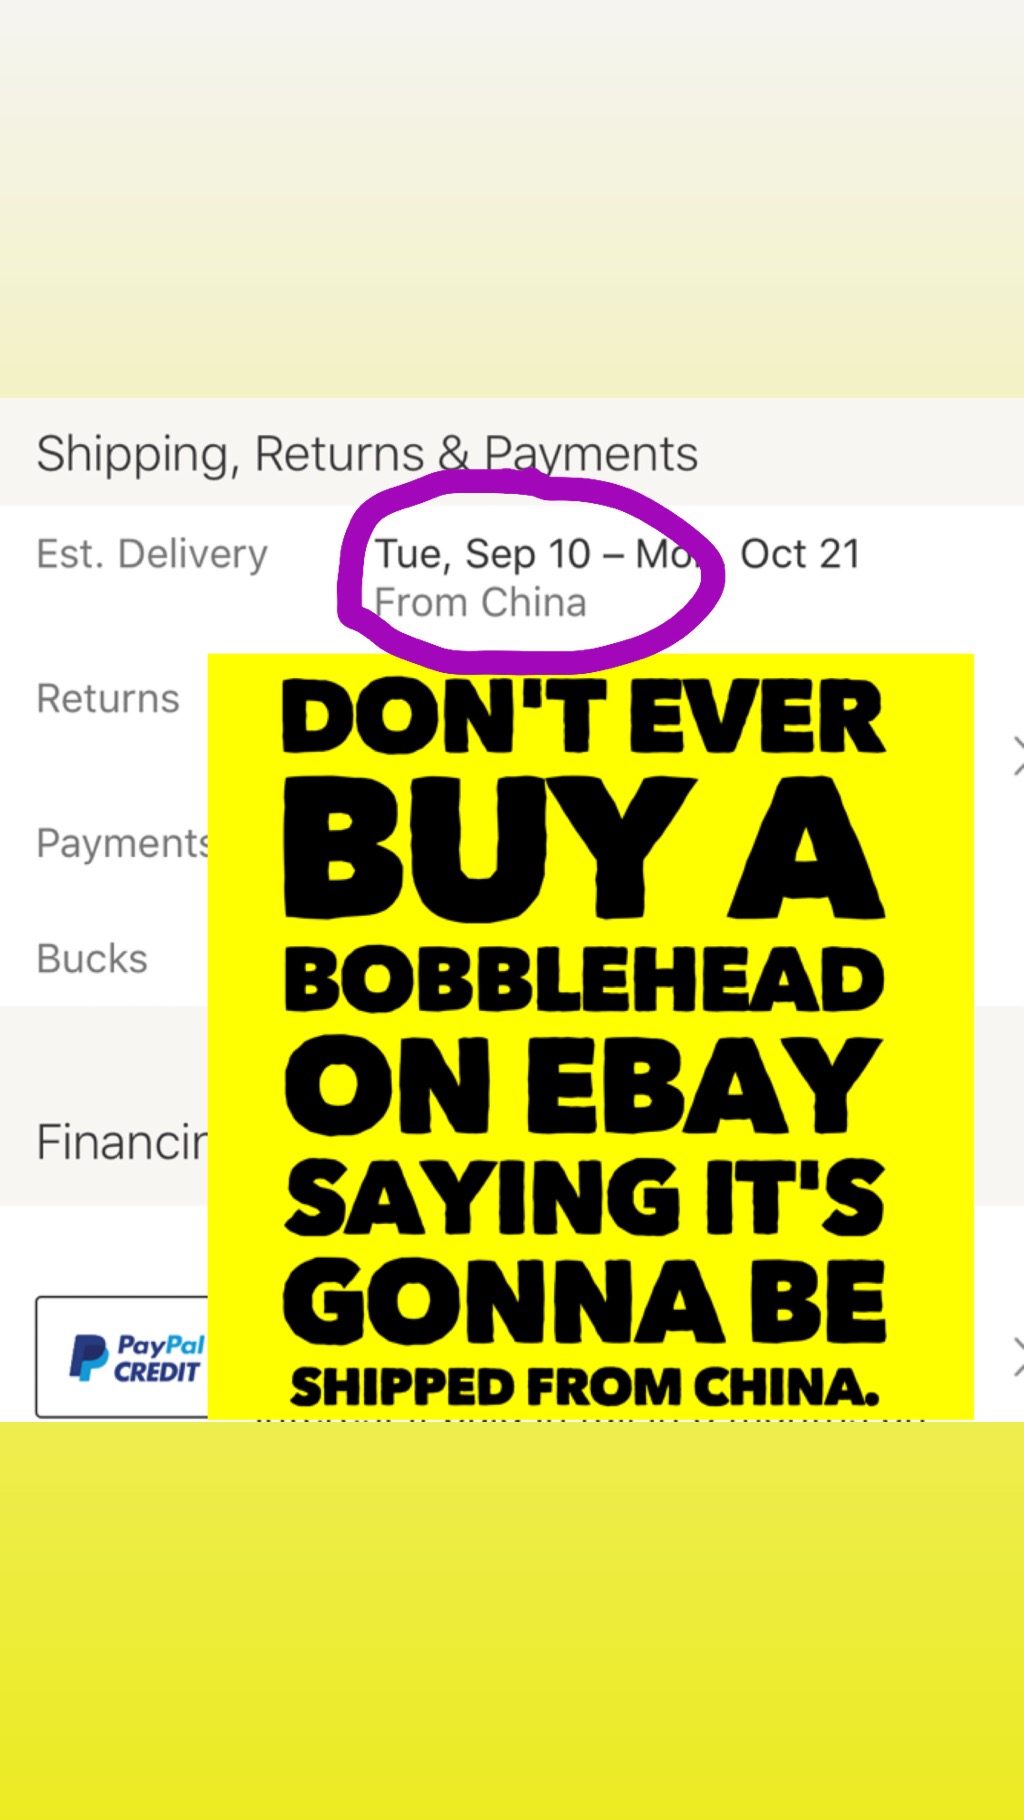 Why you should never buy a bobblehead off of Ebay showing it’s being shipped from China